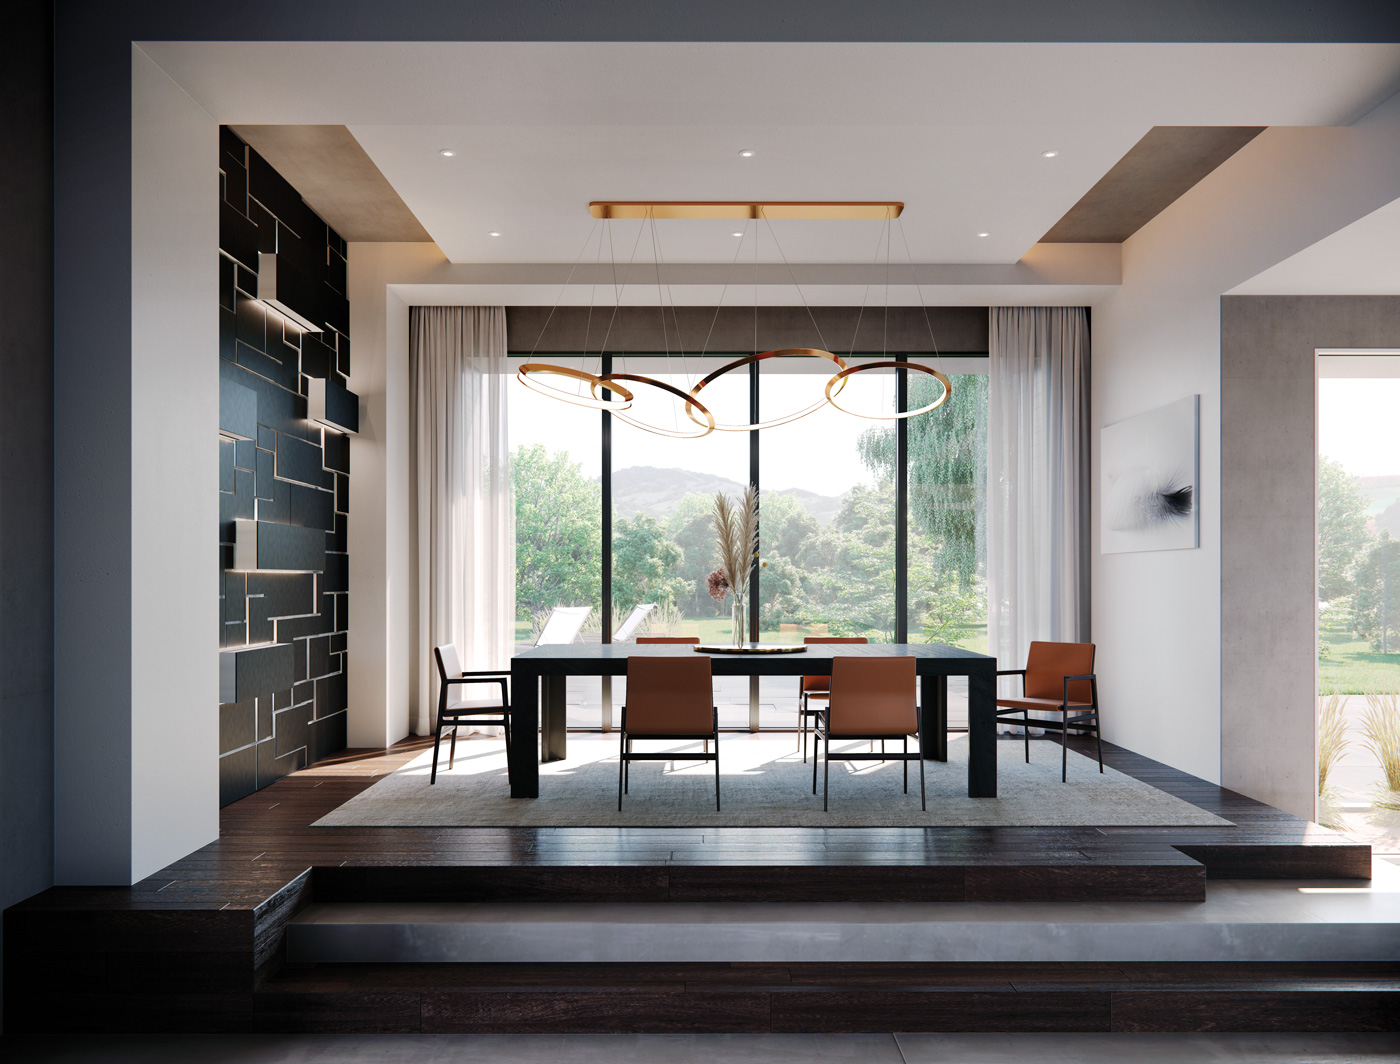 Custom, high-end windows: Signature Modern collection by Marvin